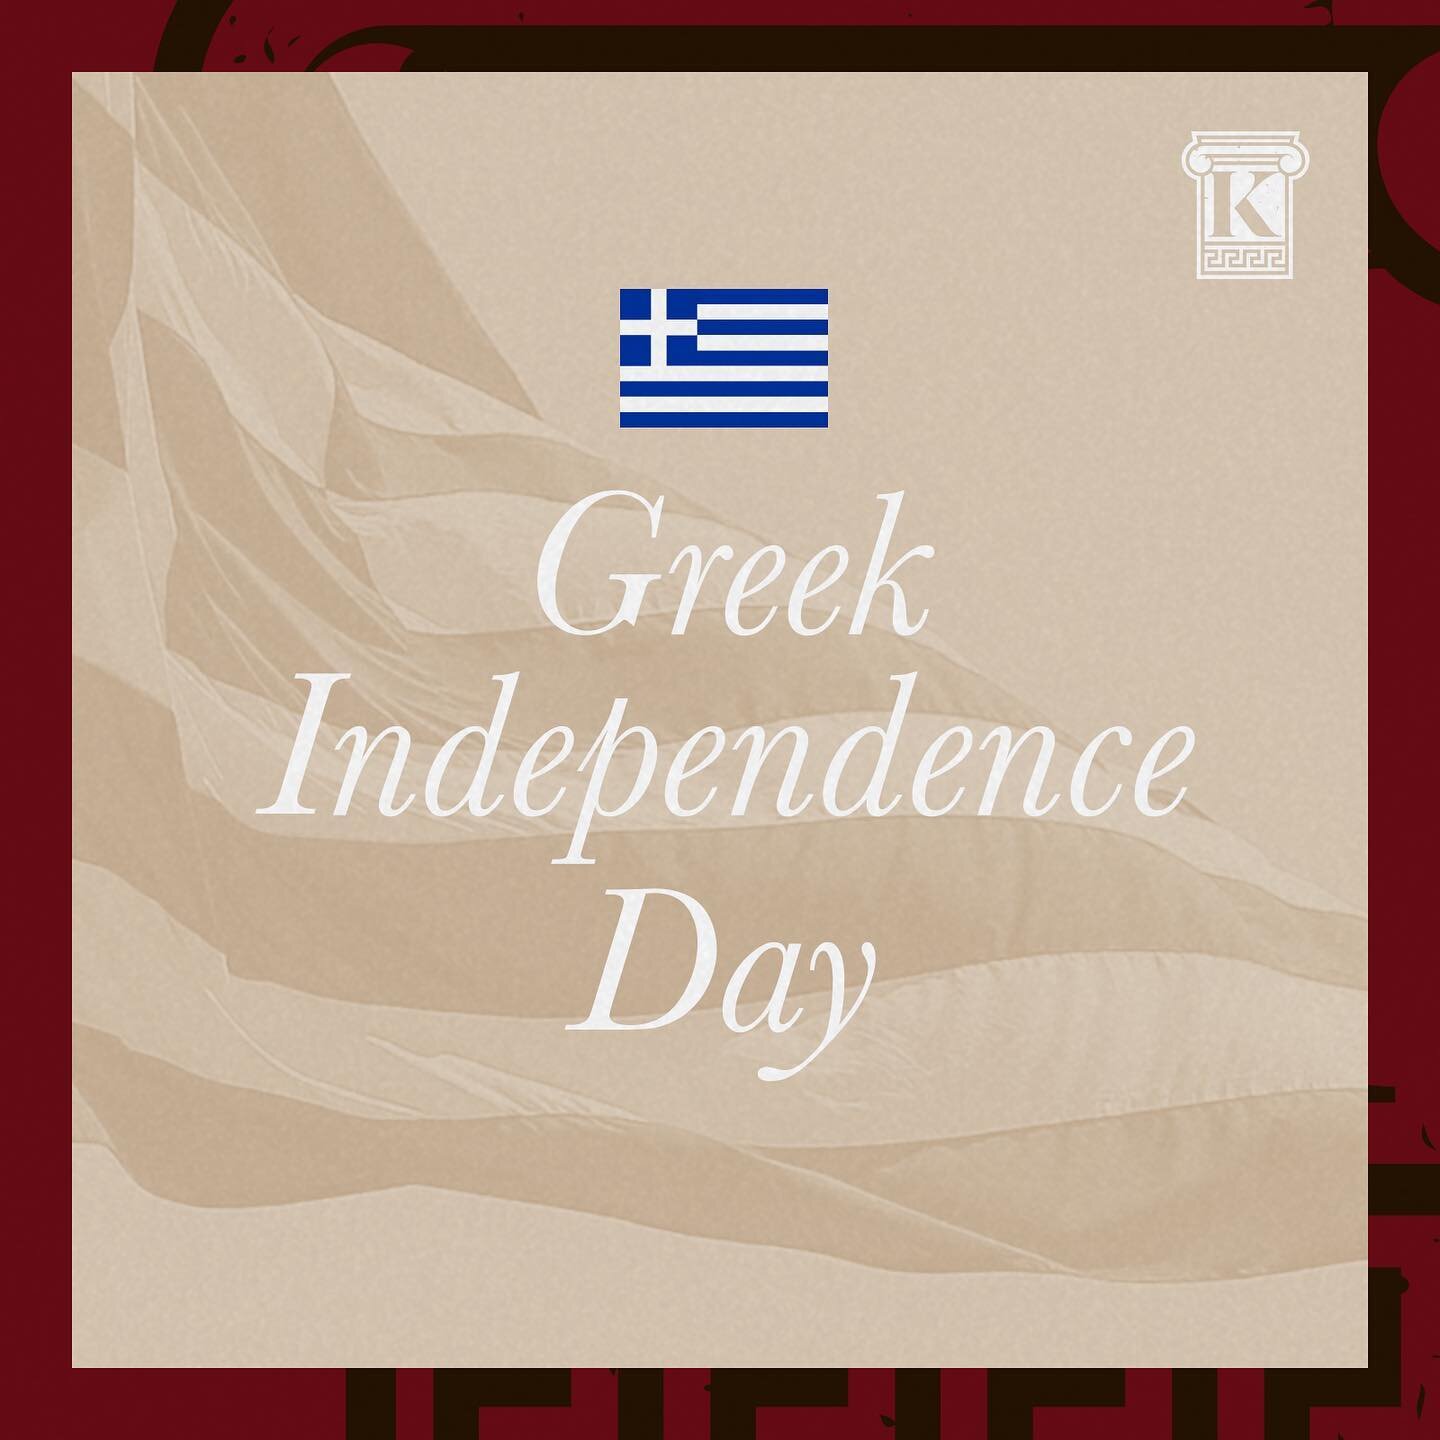 Happy Greek Independence Day! Today marks the 200th anniversary of Greece's independence. #konstantinlaw #estateplanning #bayarea